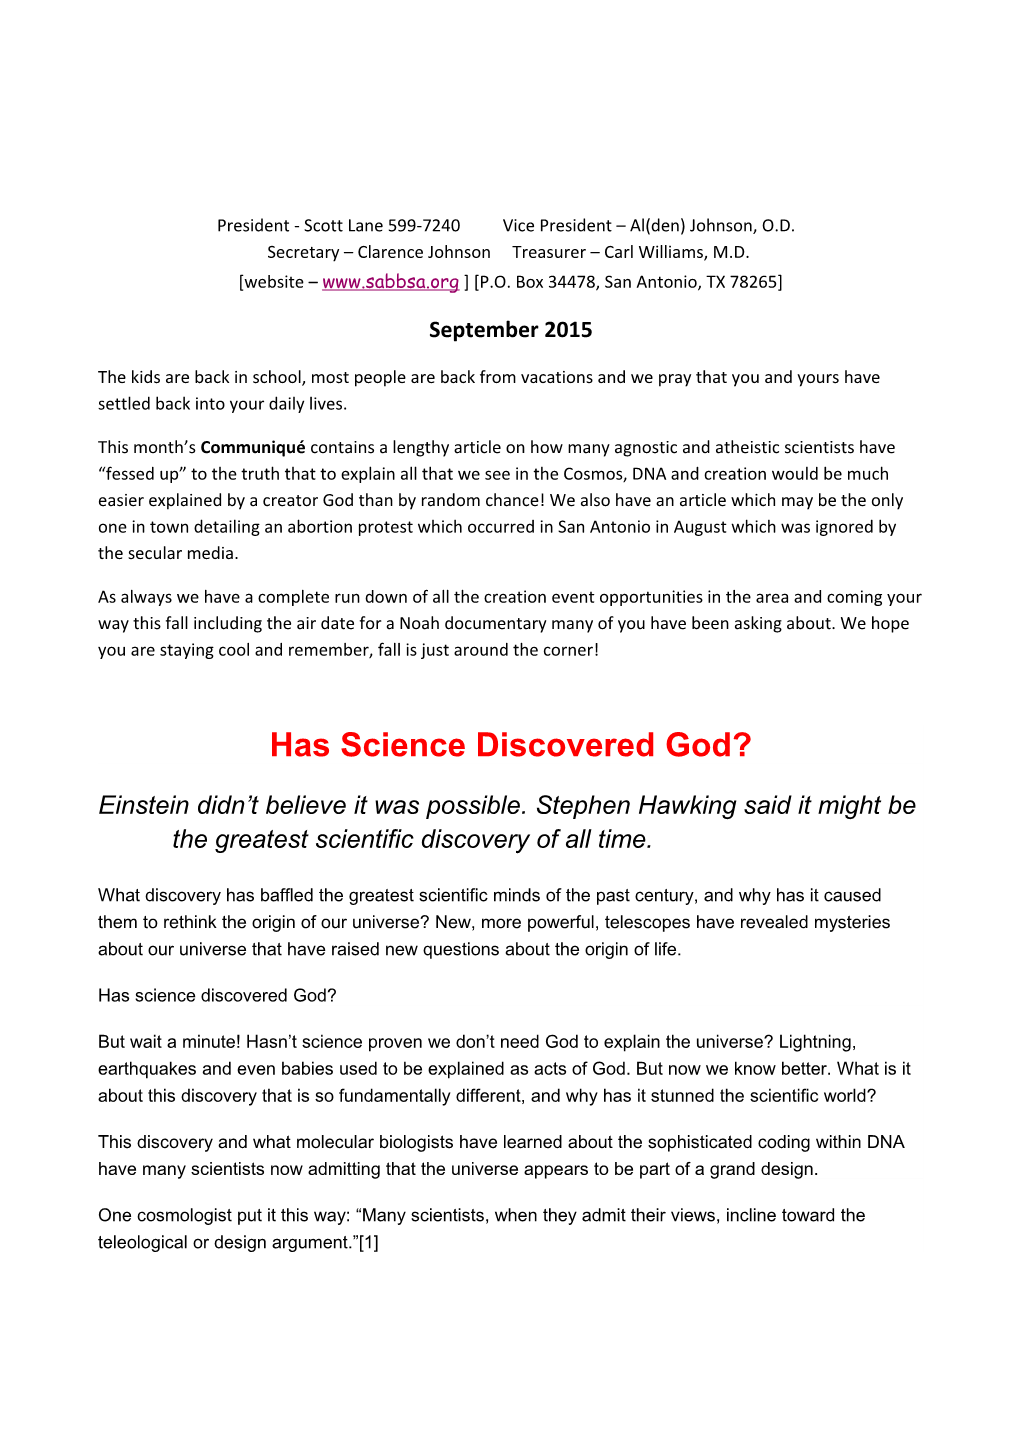 Has Science Discovered God?